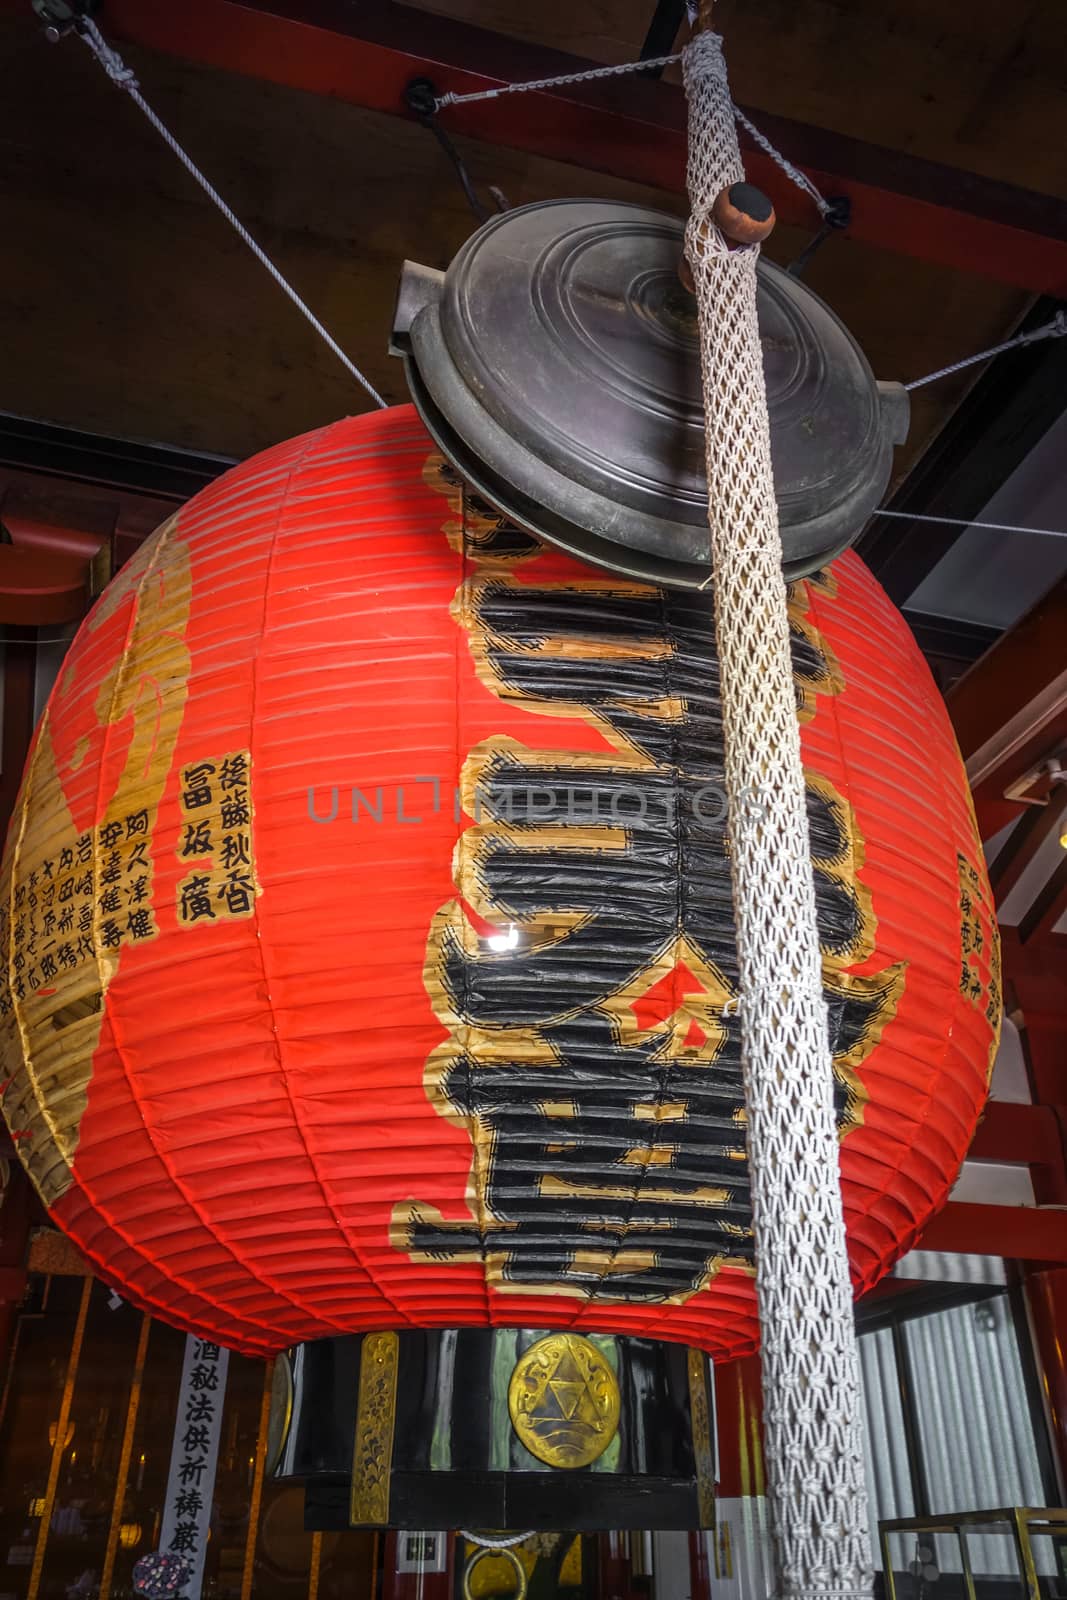 Paper lantern and gong in Ueno temple, Tokyo, Japan by daboost